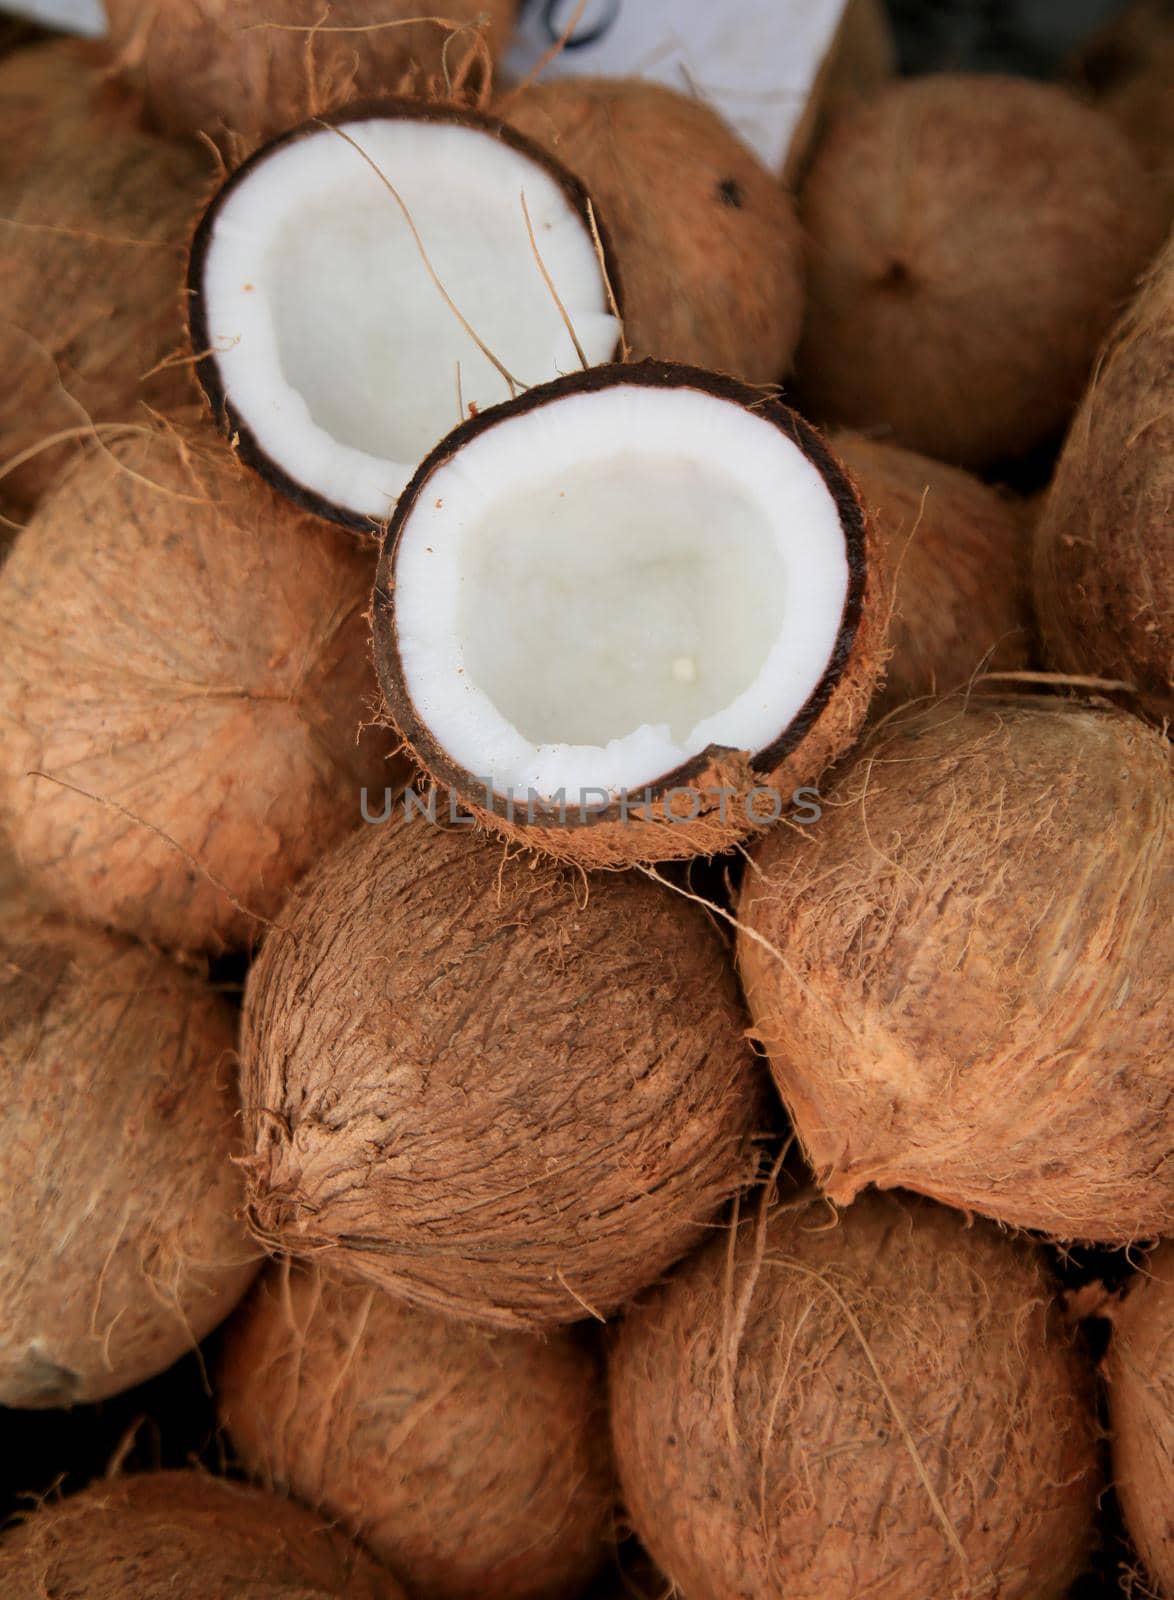 dry coconut for sale at fair by joasouza